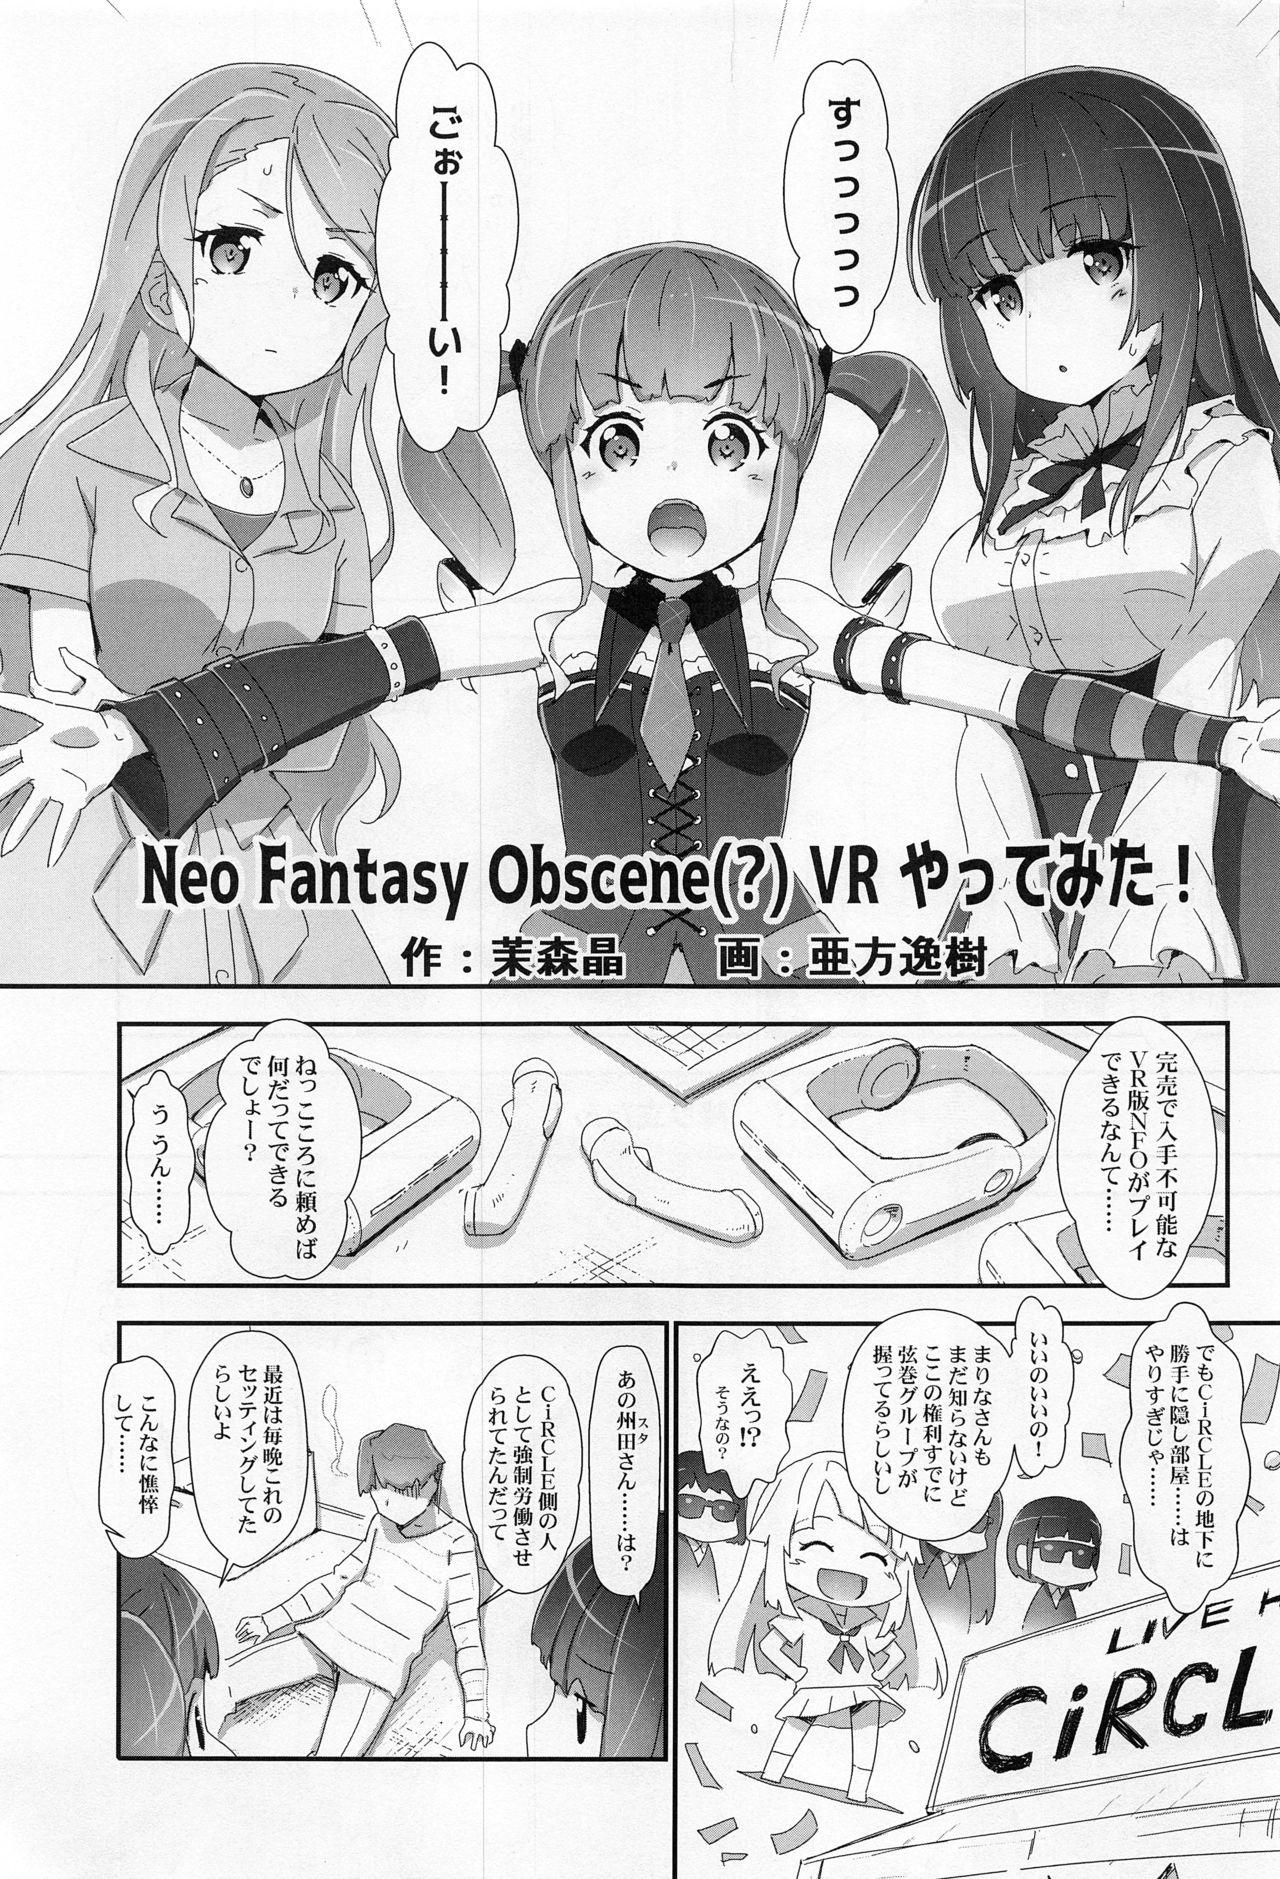 Funny EroYoro? 9 - Bang dream Old - Page 4